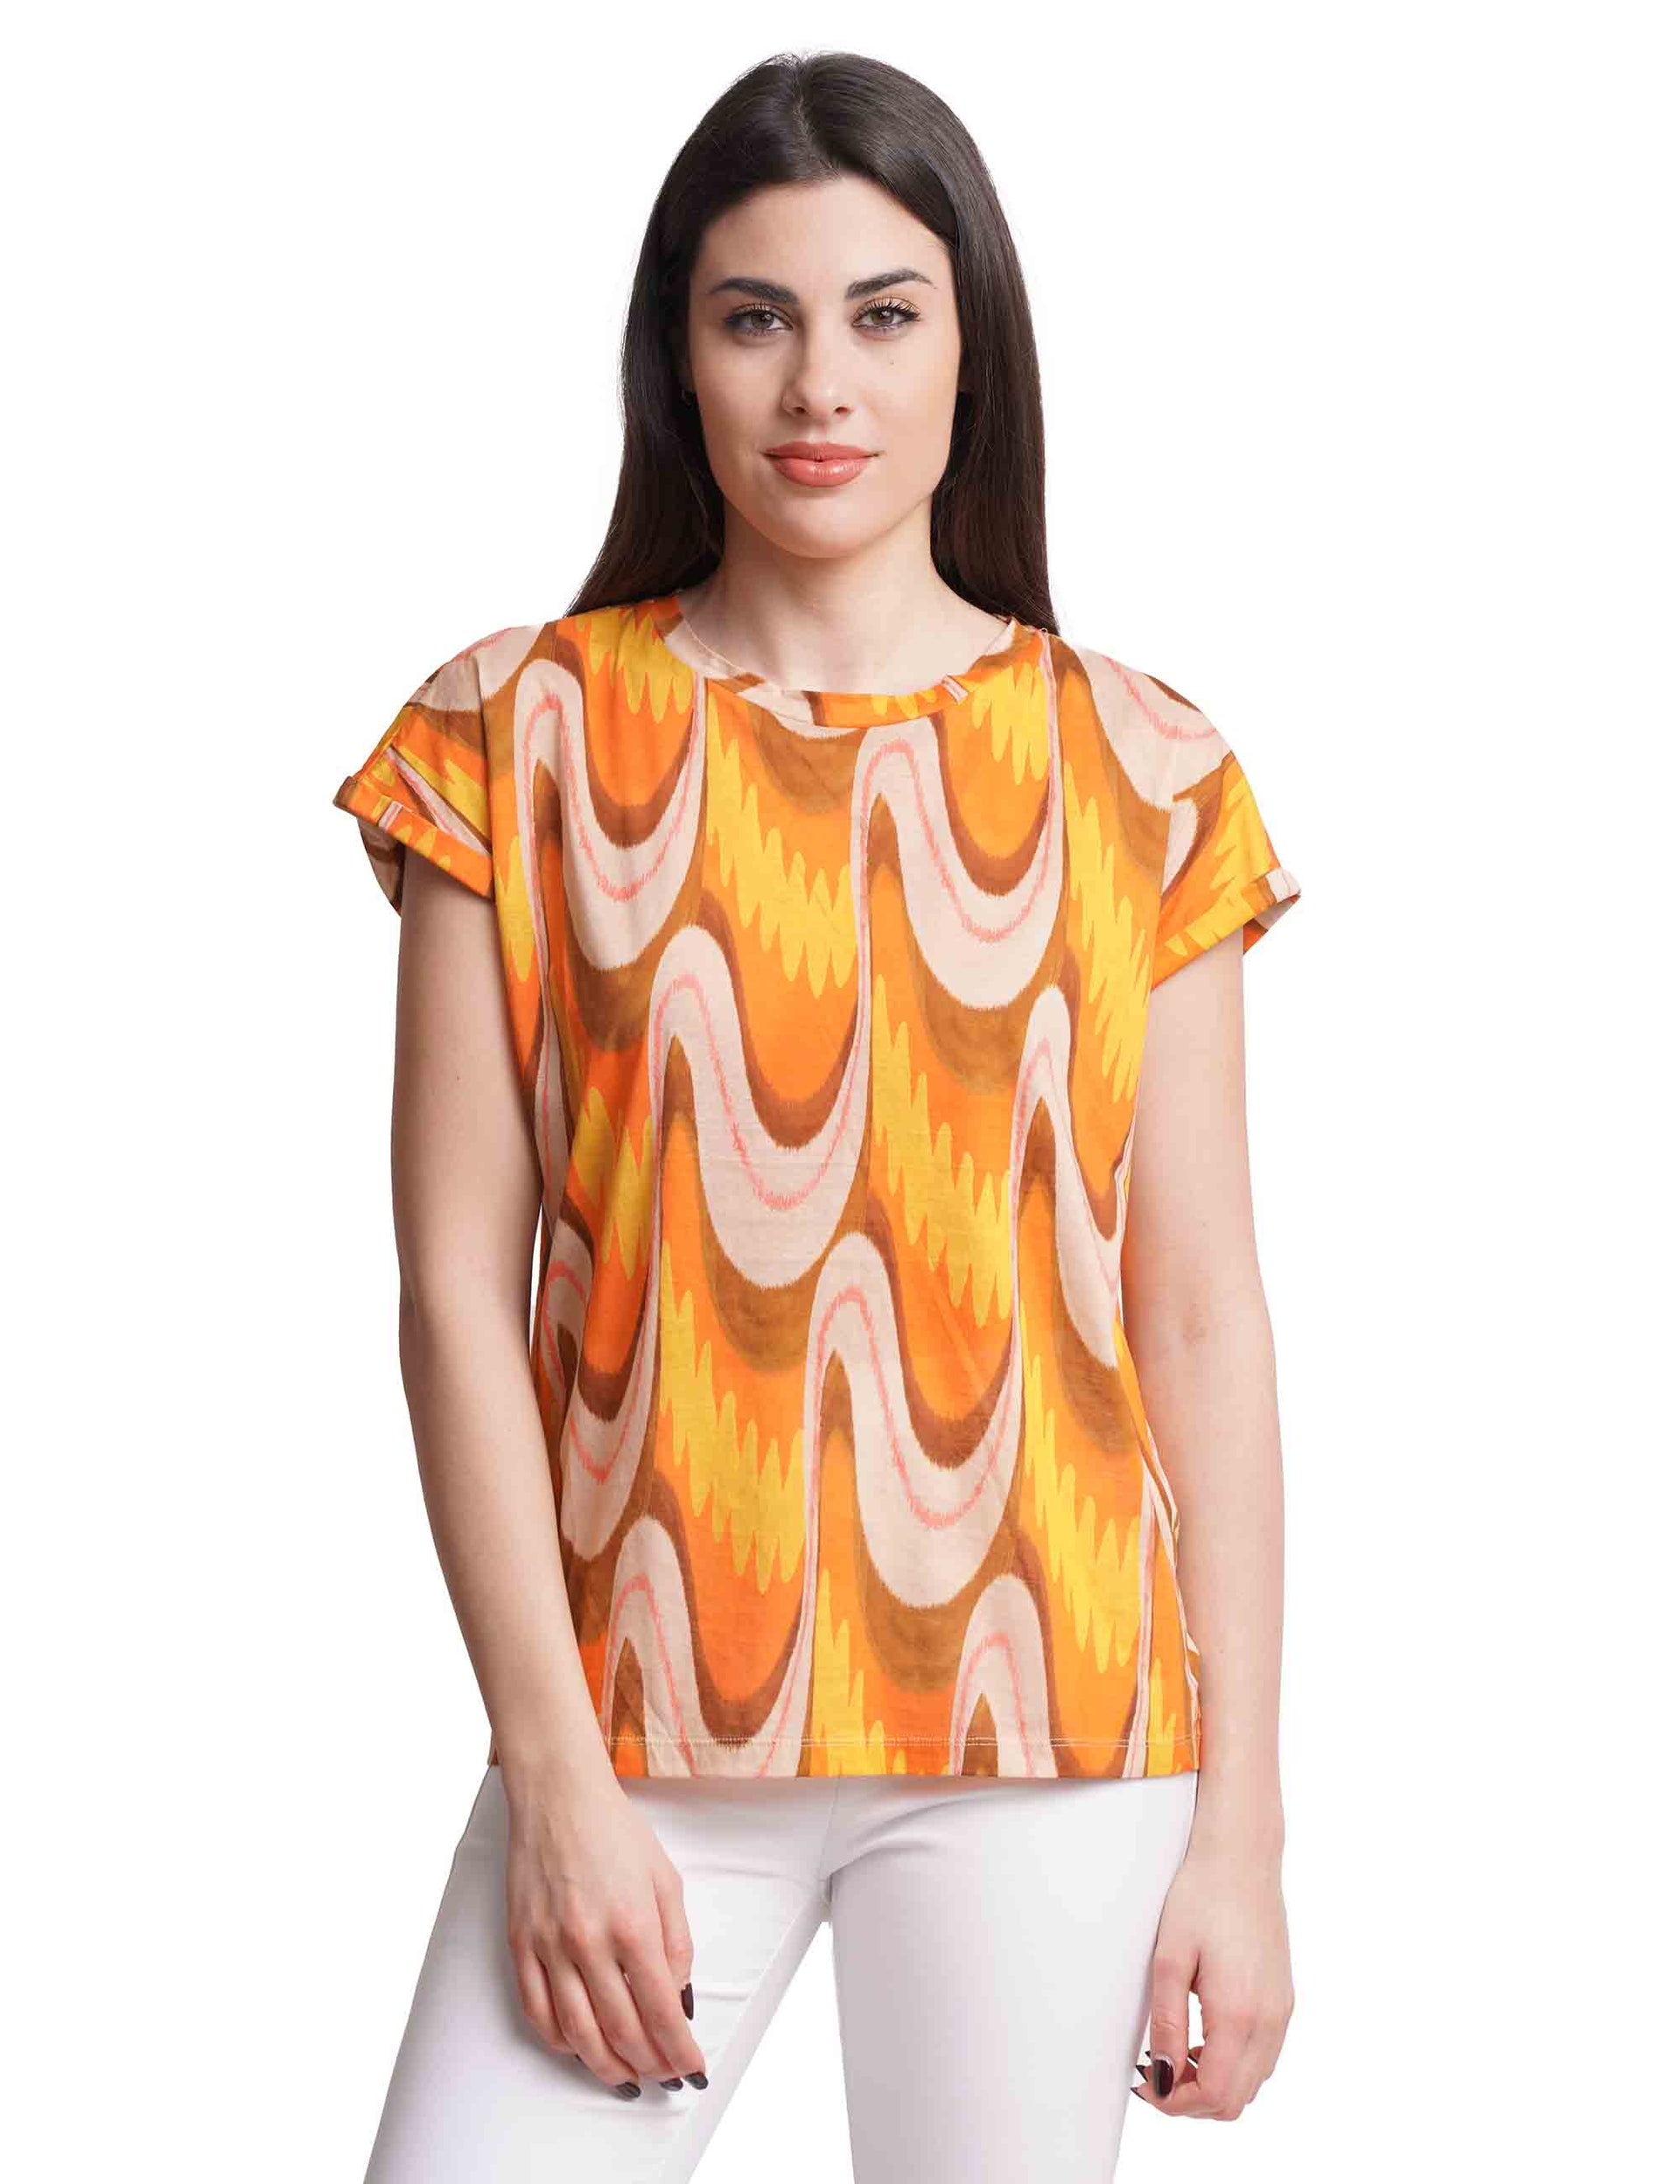 Fortuna's Prints women's t-shirts in orange patterned cotton